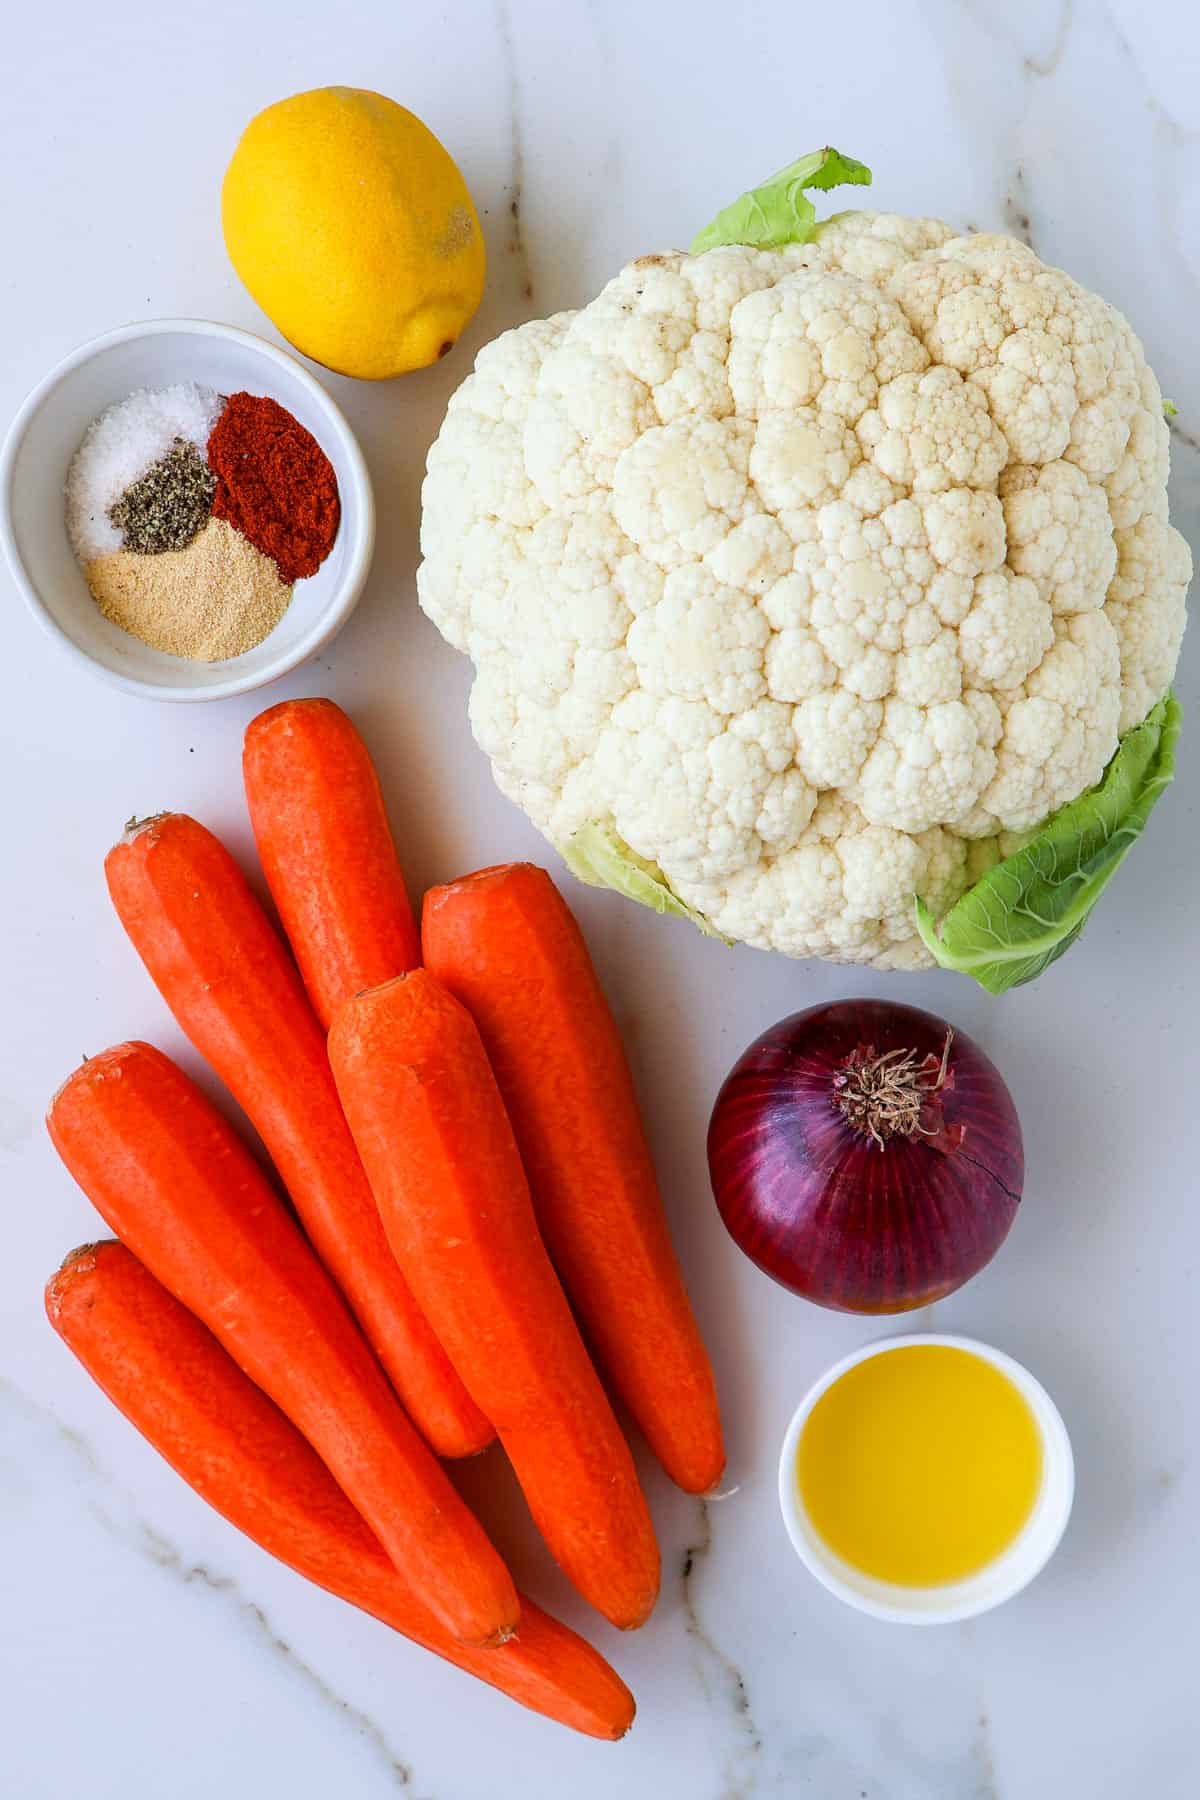 Ingredients shown to make the roasted vegetables.